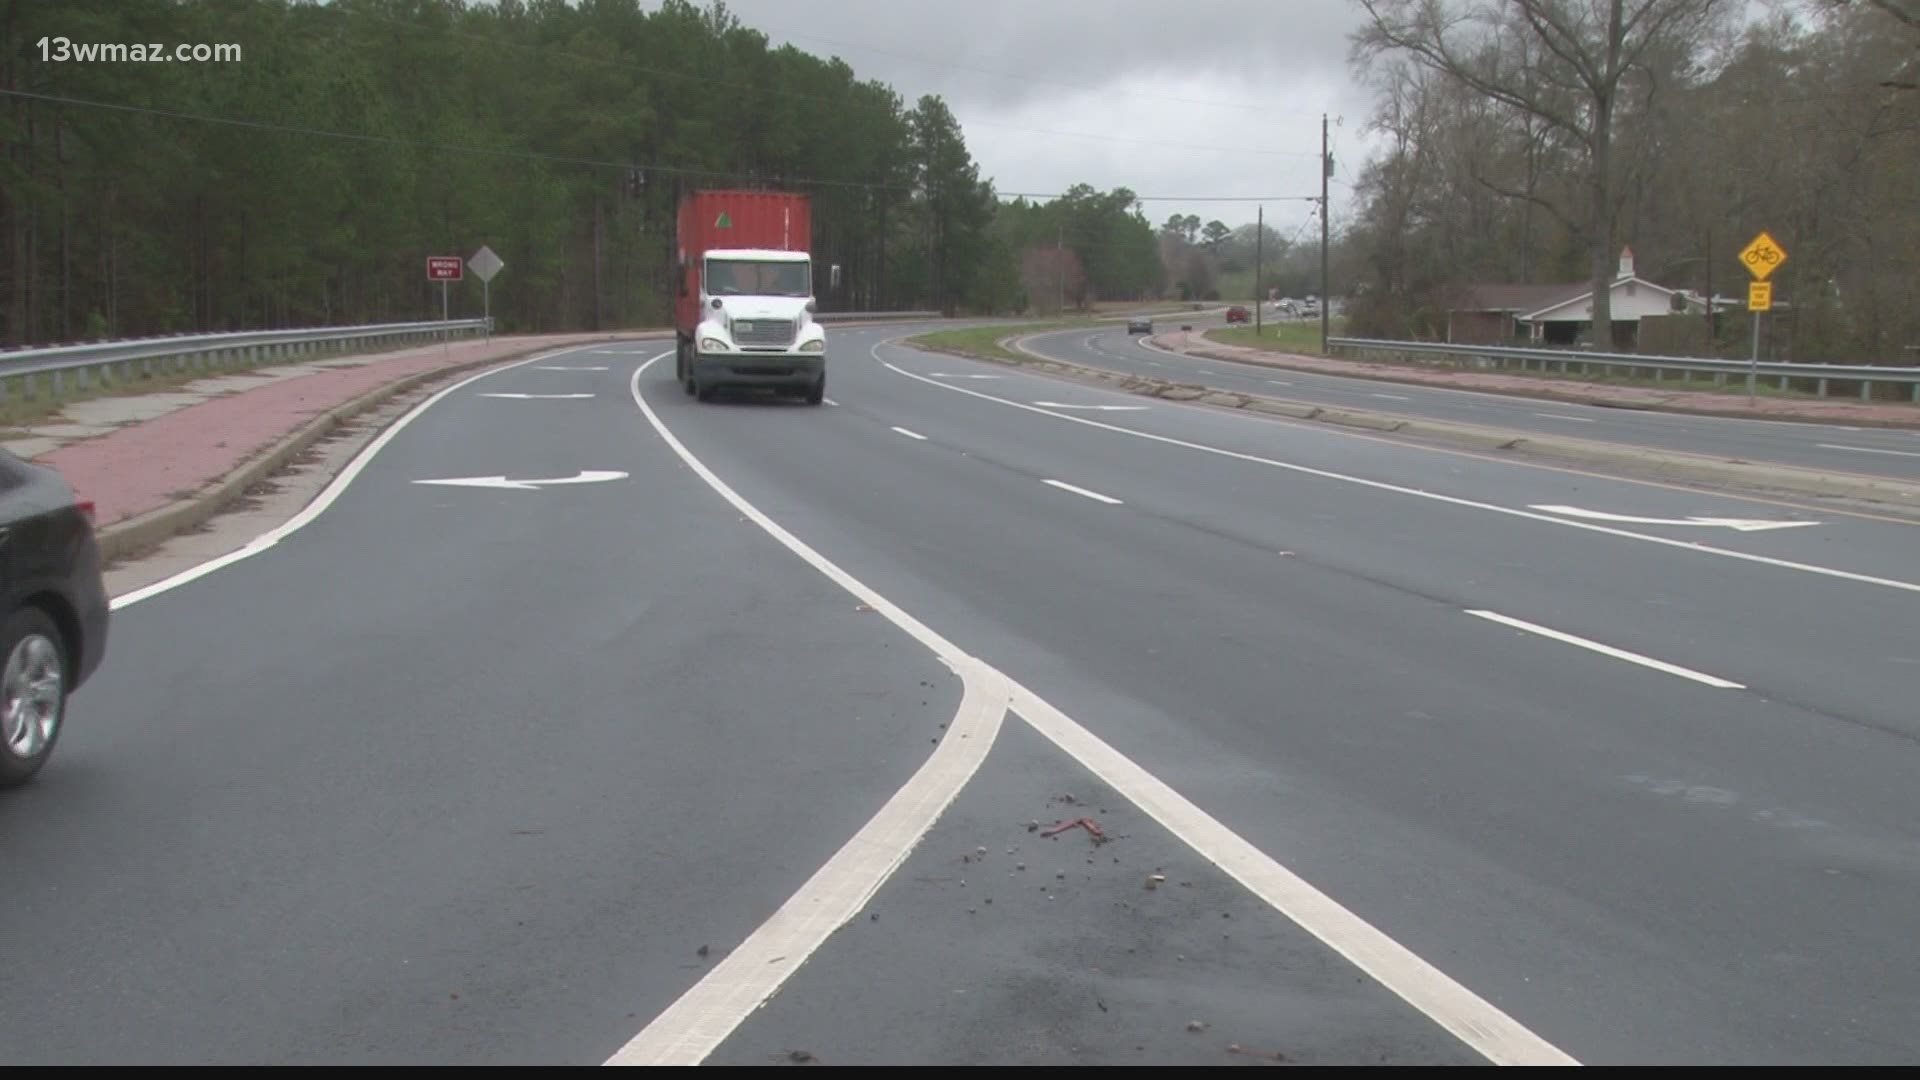 The improvements will stretch for seven miles in Twiggs county in an area that helps connect I-16 and I-75.